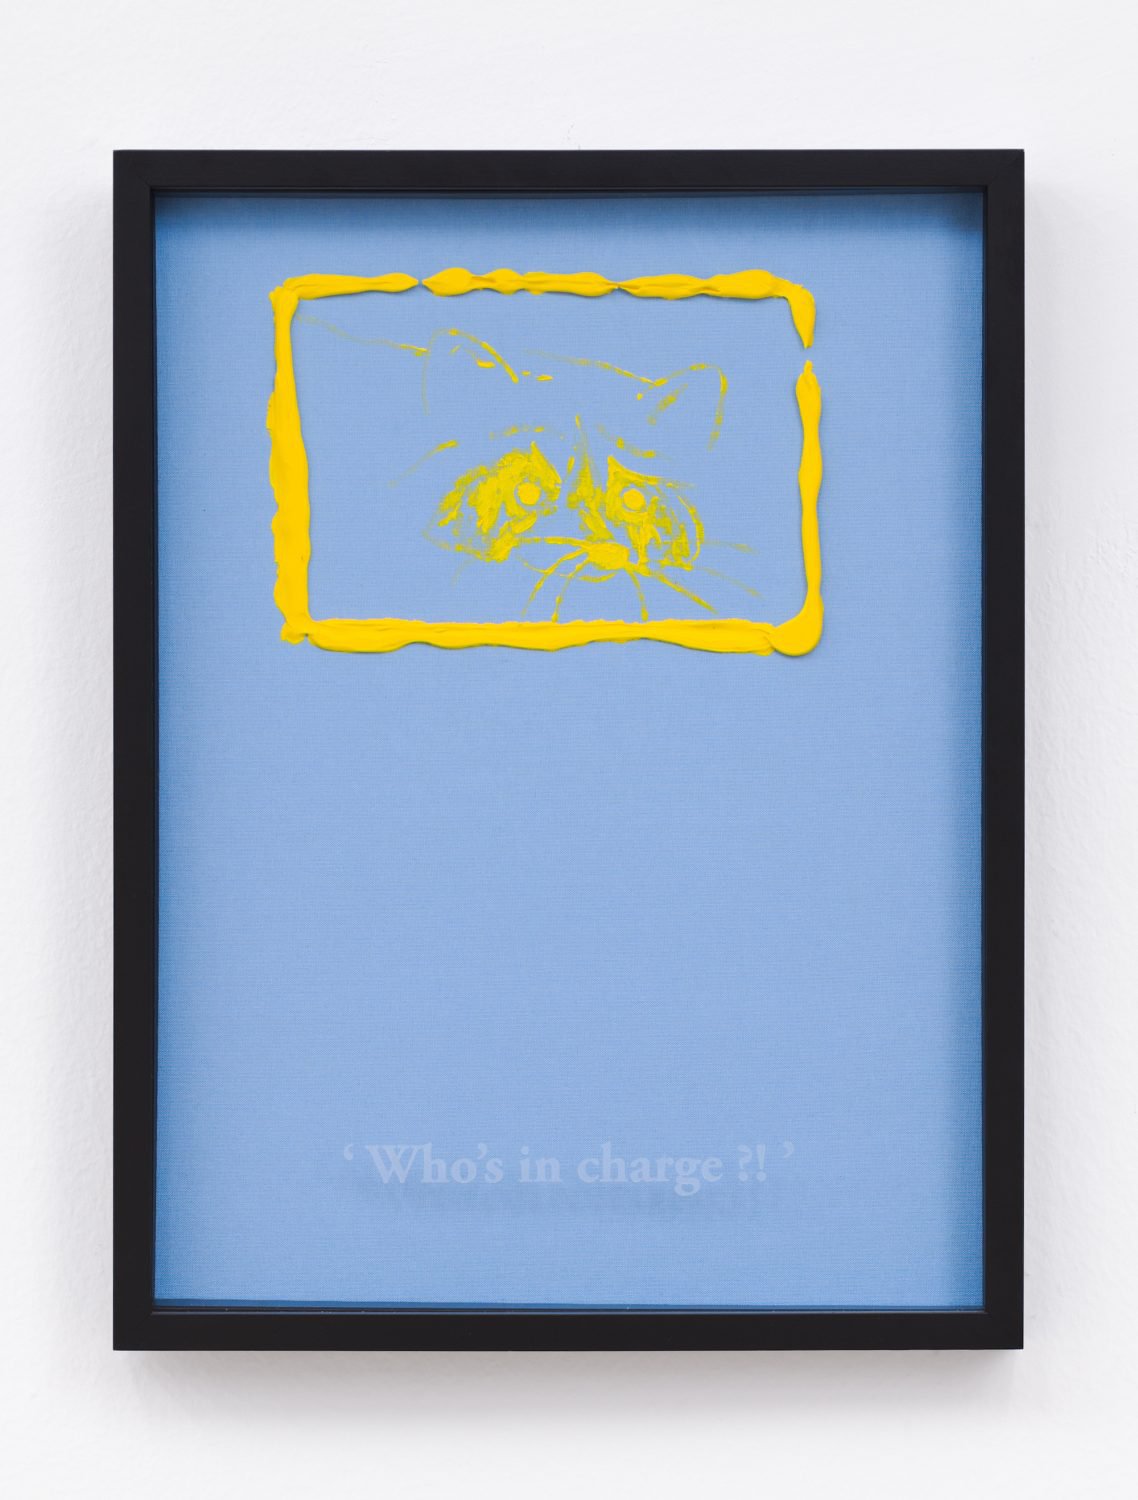 Philipp Timischl&quot;Who&#x27;s in charge?!&quot; (Light Blue/Cadmium Yellow Lemon), 2017Acrylic on linen and glass-engraved object frame40.1 x 32.1 cm, unique